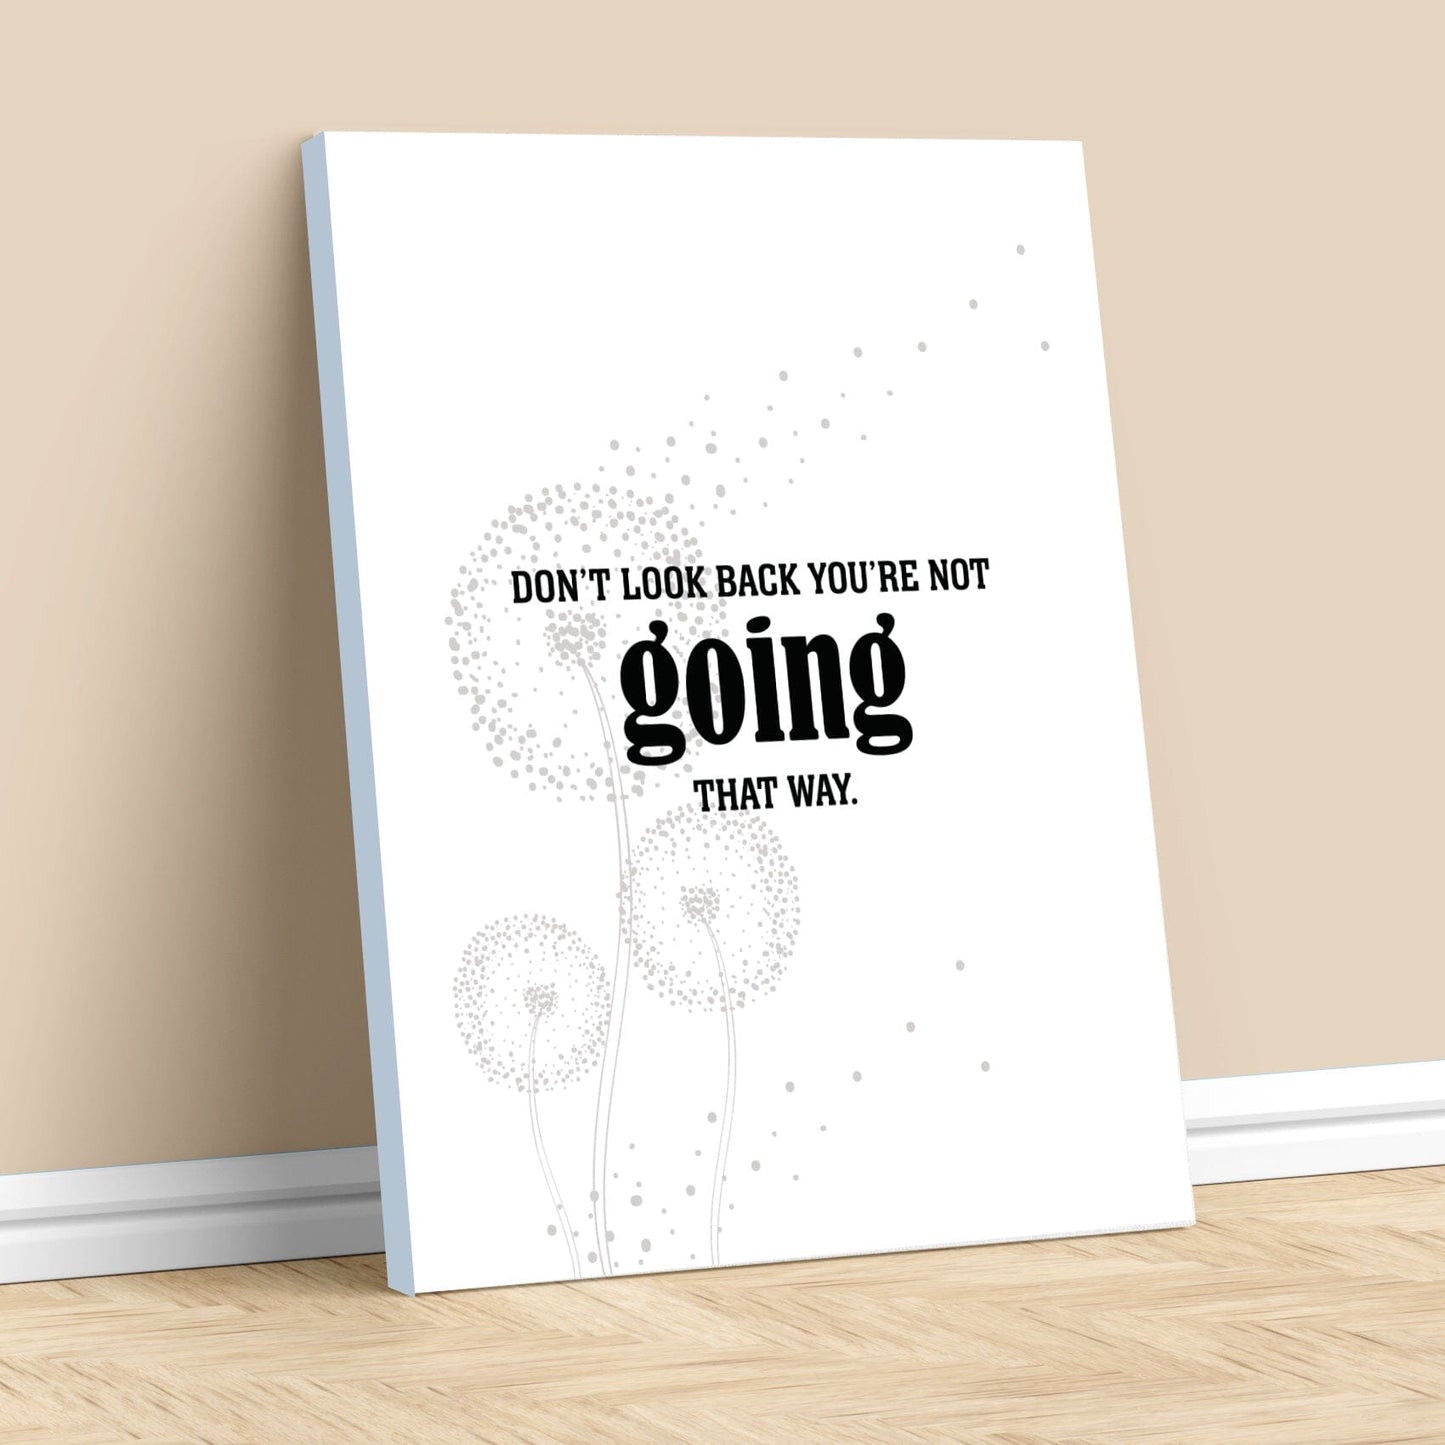 Don't Look Back You're Not Going that Way - Wise Witty Art Wise and Wiseass Quotes Song Lyrics Art 11x14 Canvas Wrap 